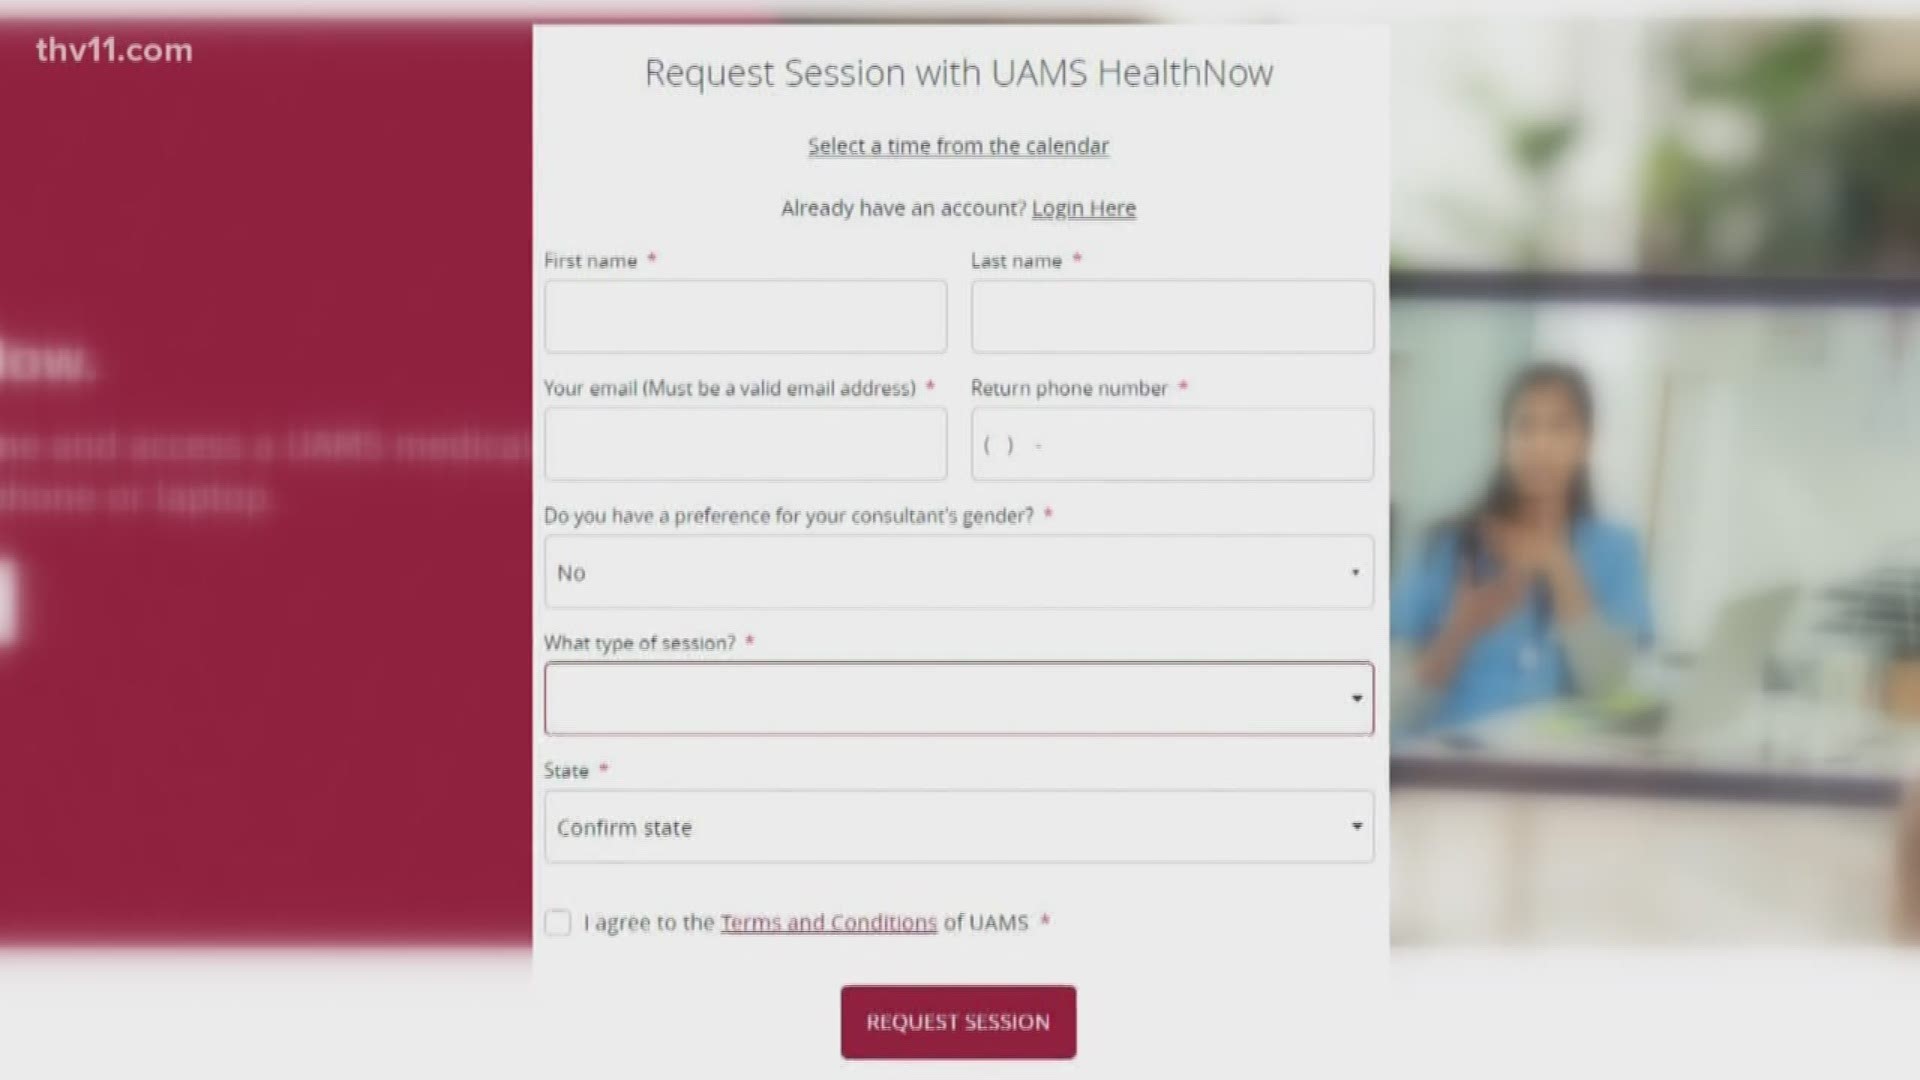 UAMS is offering free online screening tests for anyone in Arkansas who suspects they are showing symptoms of the coronavirus.